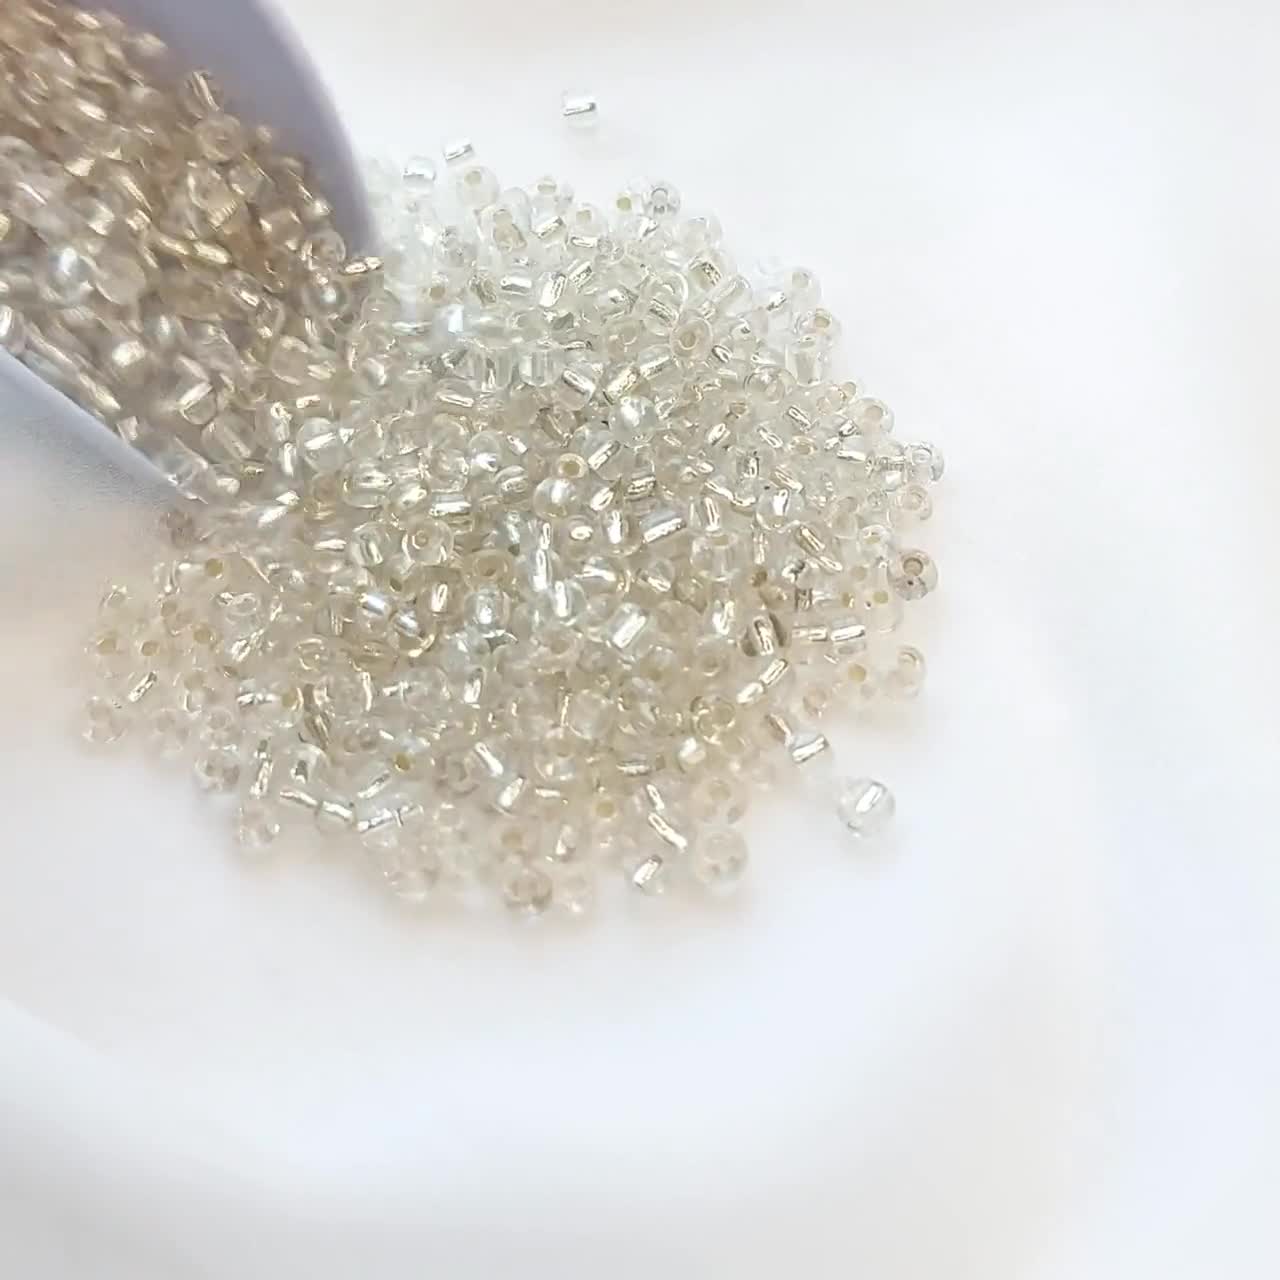 4mm Seed Beads 40g , Clear Silverlined Seed Beads, DIY Jewelry